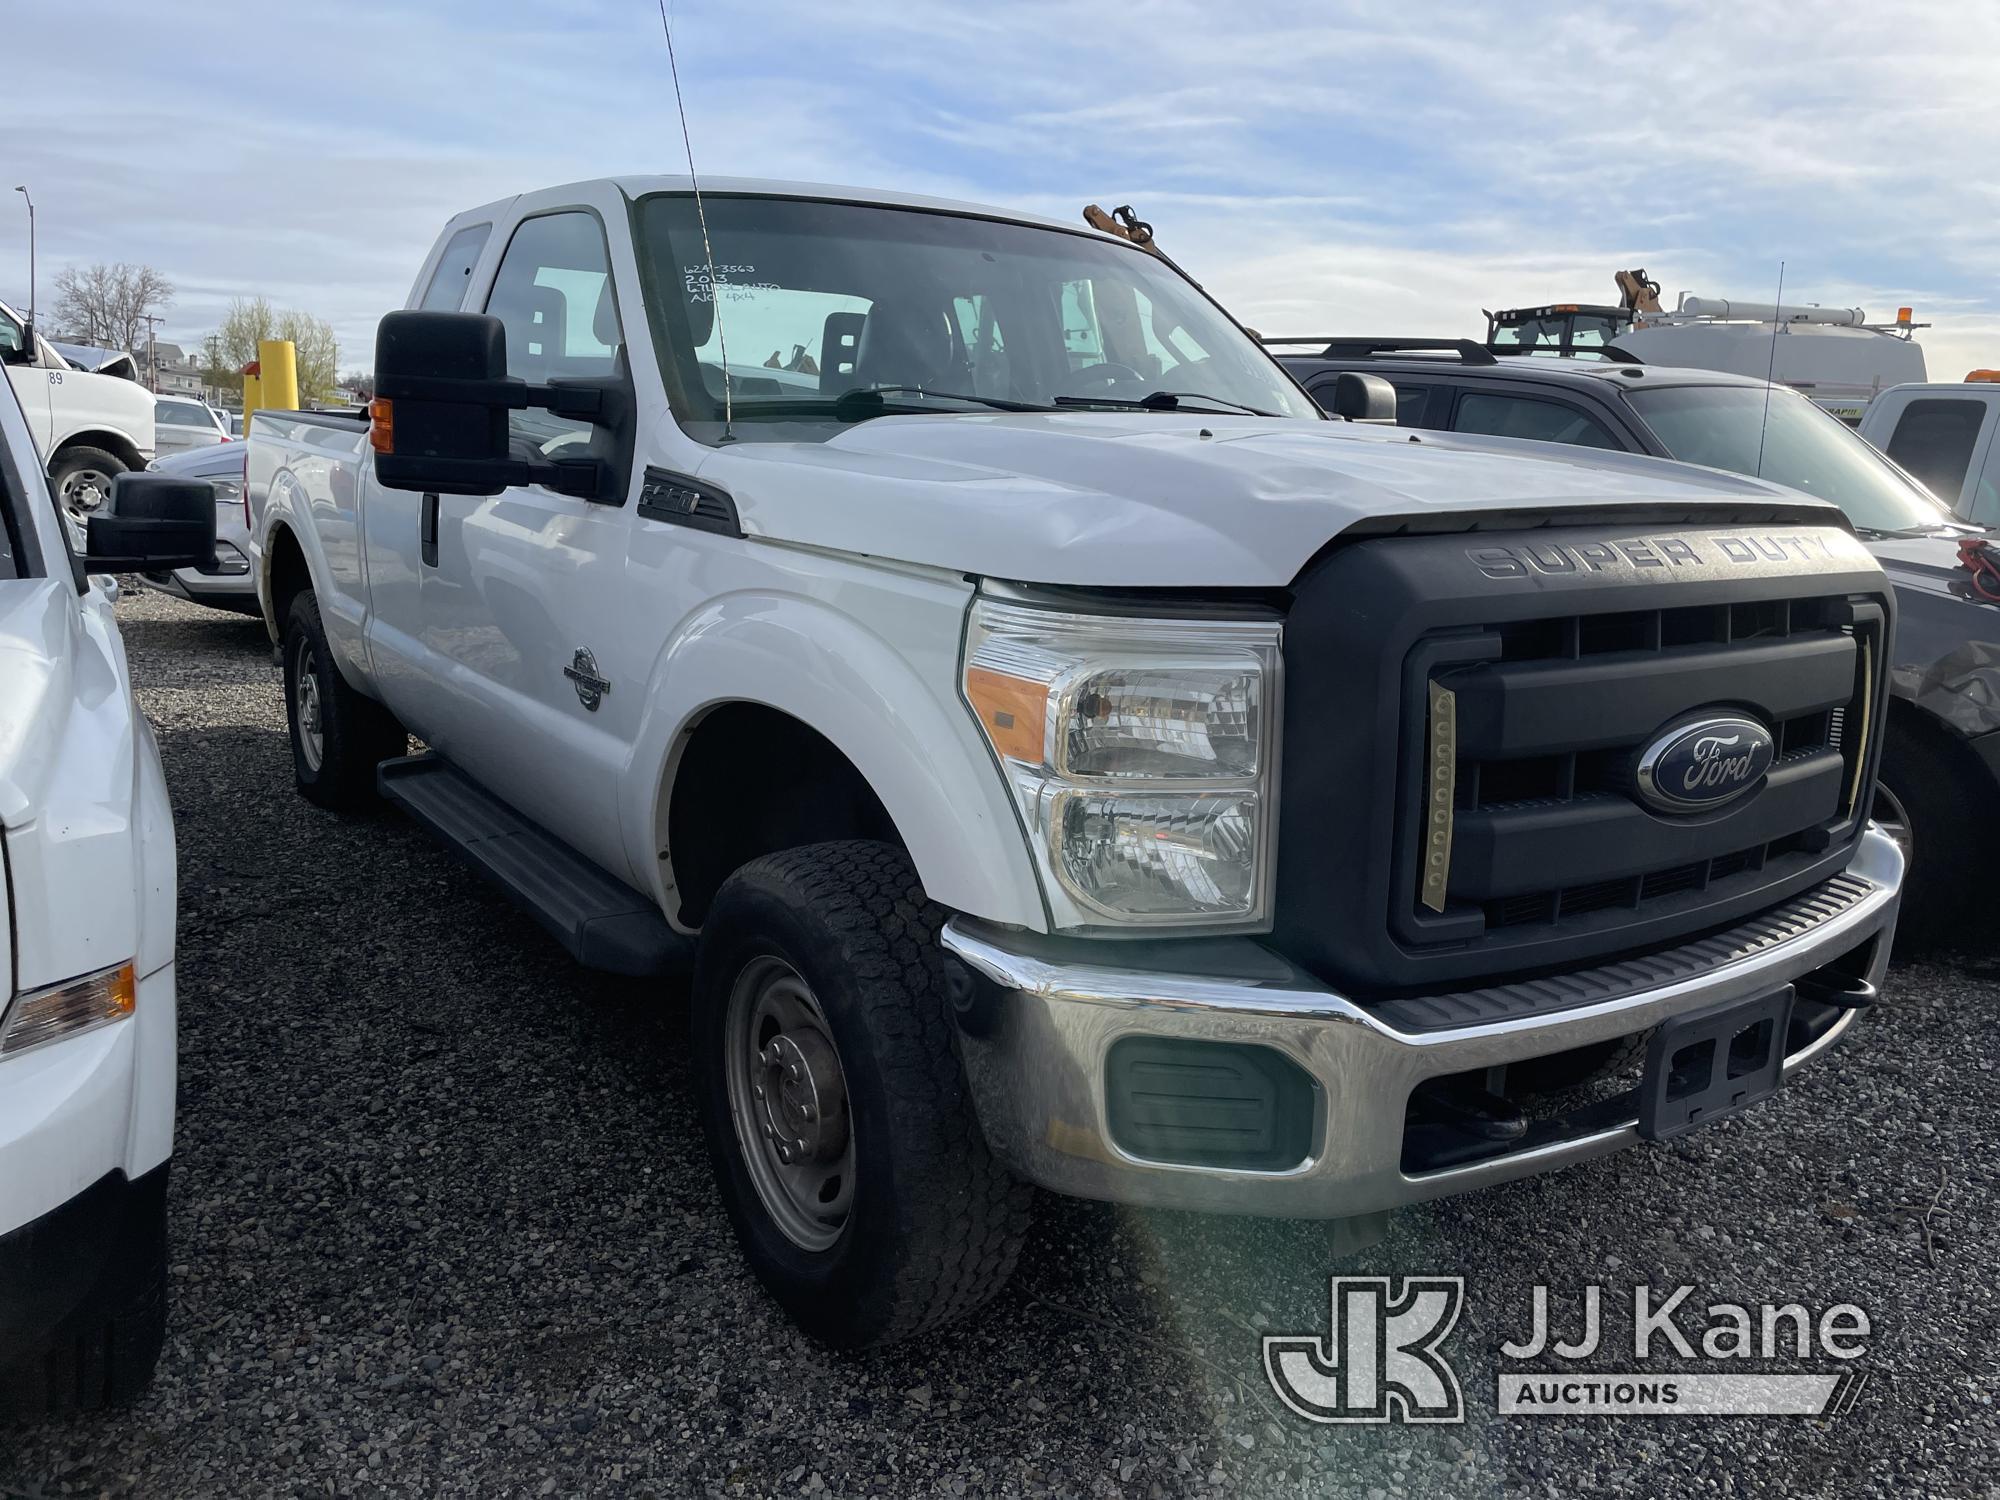 (Plymouth Meeting, PA) 2013 Ford F250 4x4 Extended-Cab Pickup Truck Runs & Moves, Fuel Leak, Do Not